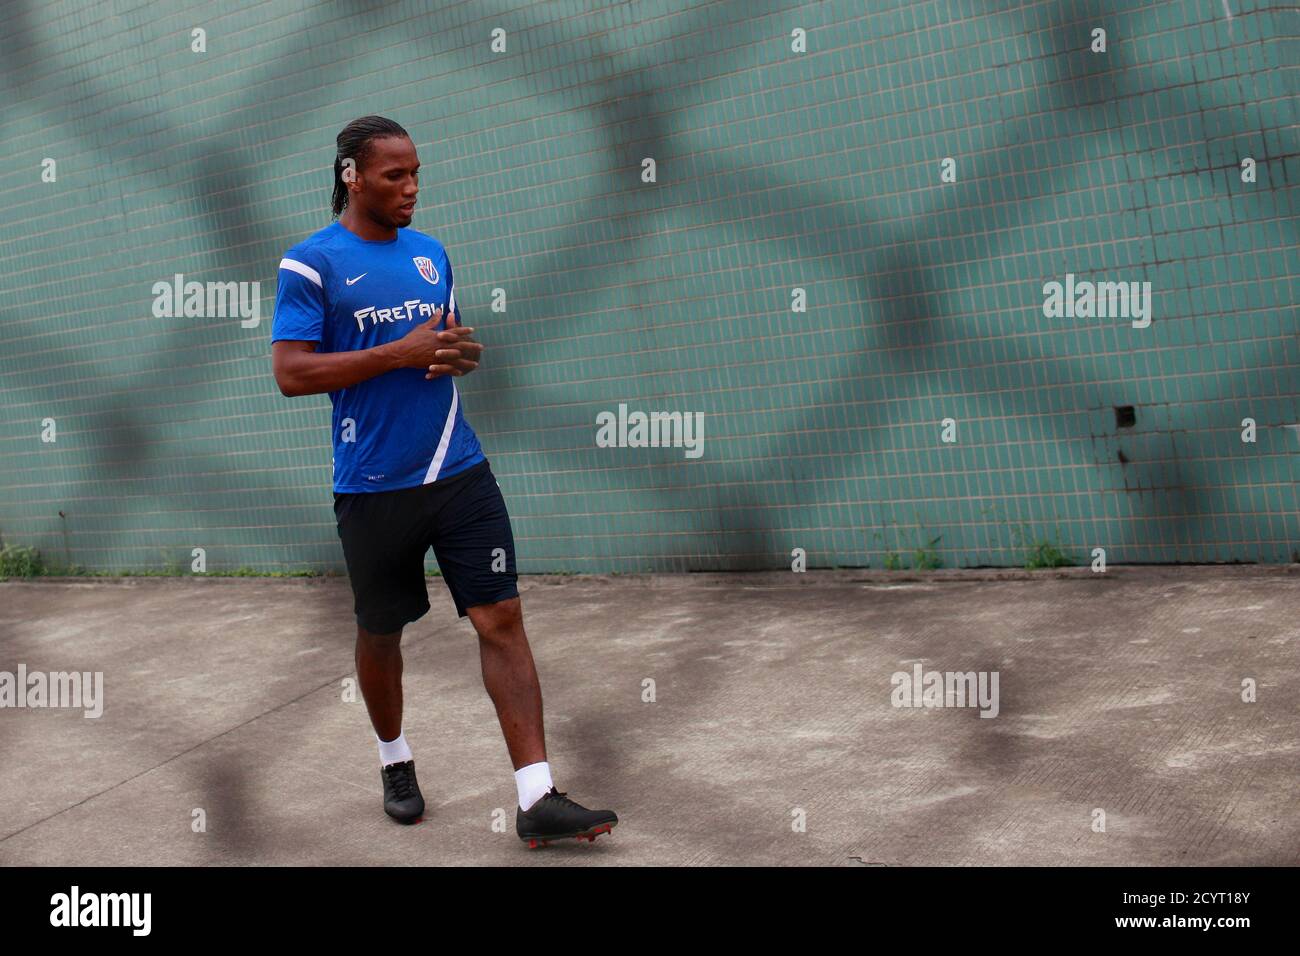 Shanghai Shenhua striker Didier Drogba of Ivory Coast attends a training session in Shanghai July 16, 2012. Drogba has signed a two-and-a-half-year contract with the big-spending Chinese Super League club for a reported salary of $300,000 a week, ending weeks of speculation on his future after he announced his decision to leave Champions League winners Chelsea. REUTERS/Aly Song (CHINA - Tags: SPORT SOCCER) Stock Photo